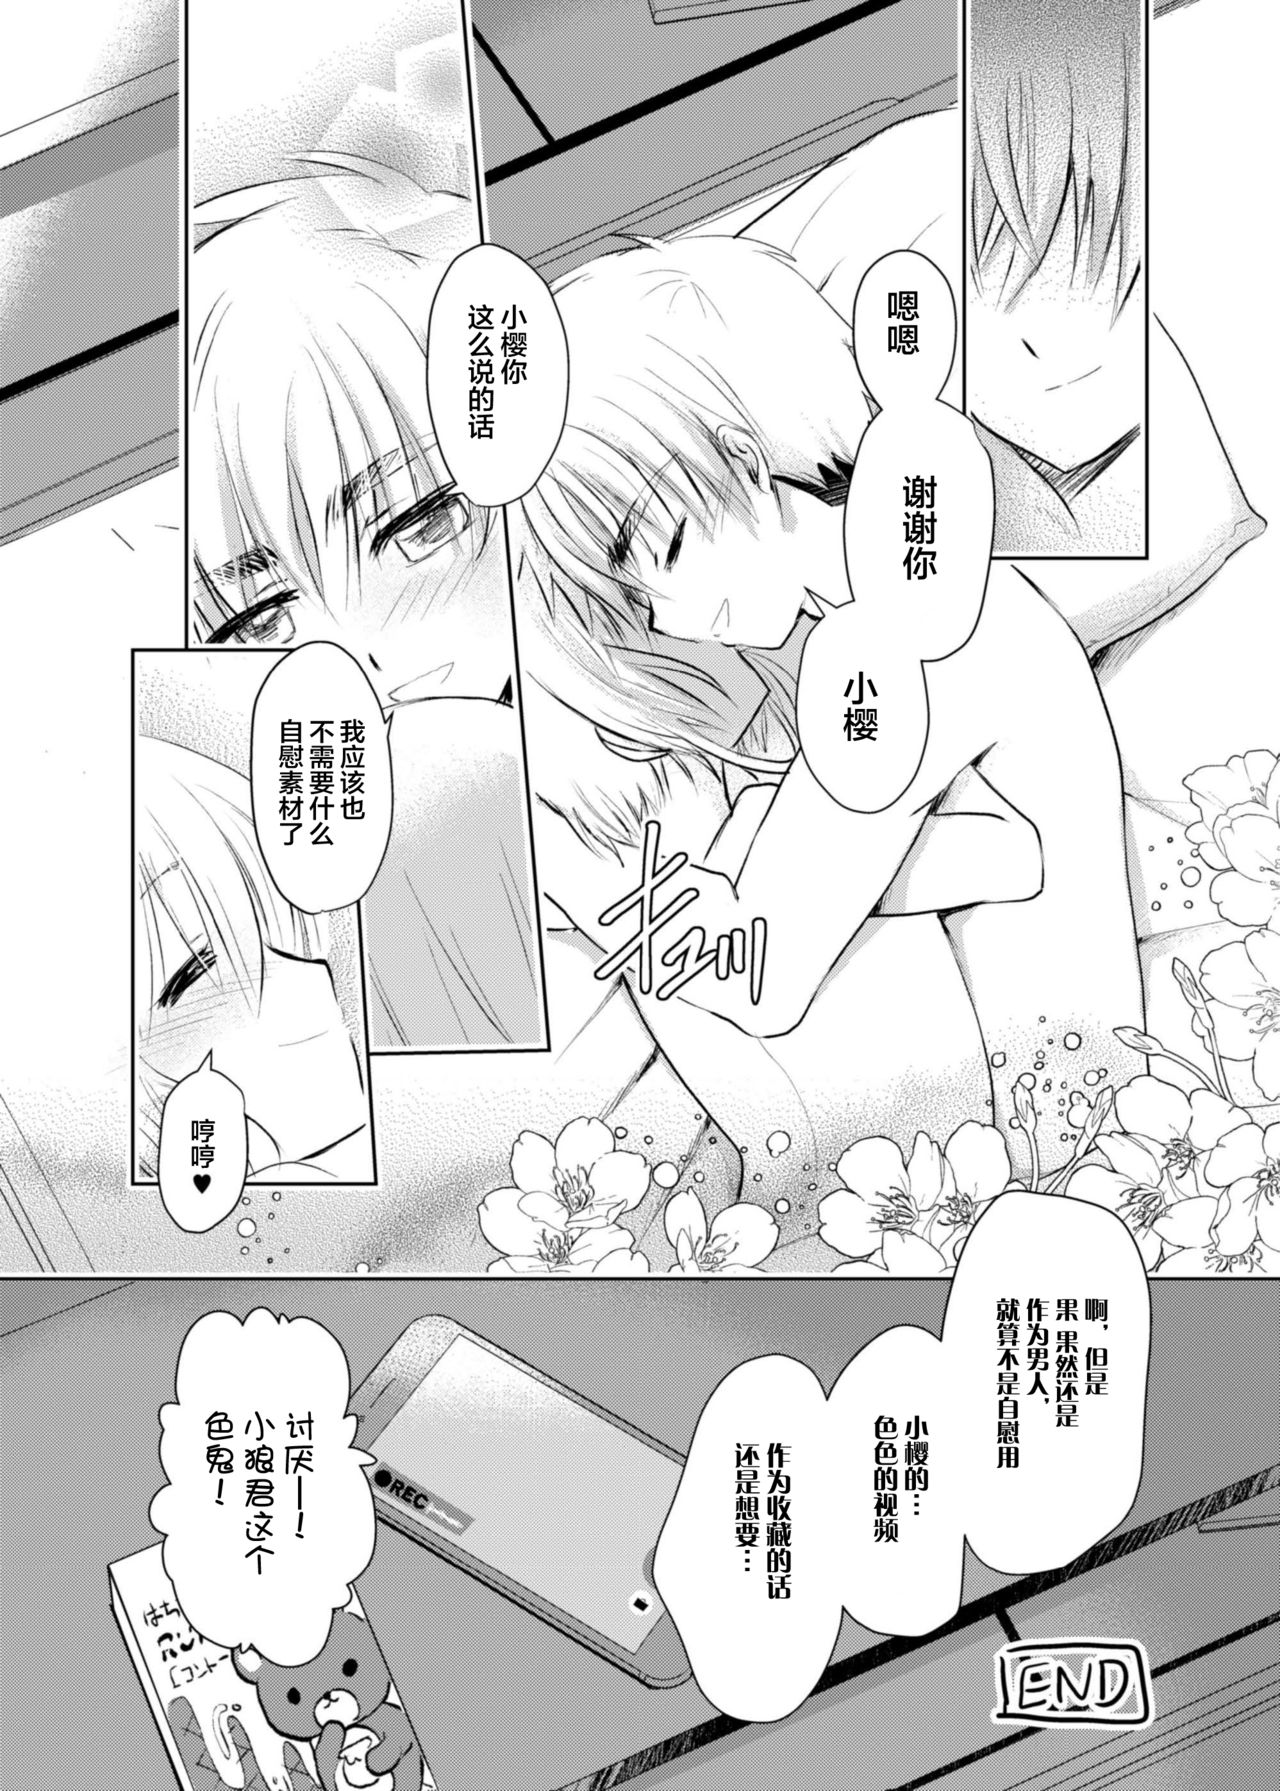 [Maple of Forest (Kaede Sago)] Give and Take (Cardcaptor Sakura) [Chinese] [新桥月白日语社] [Digital] page 37 full